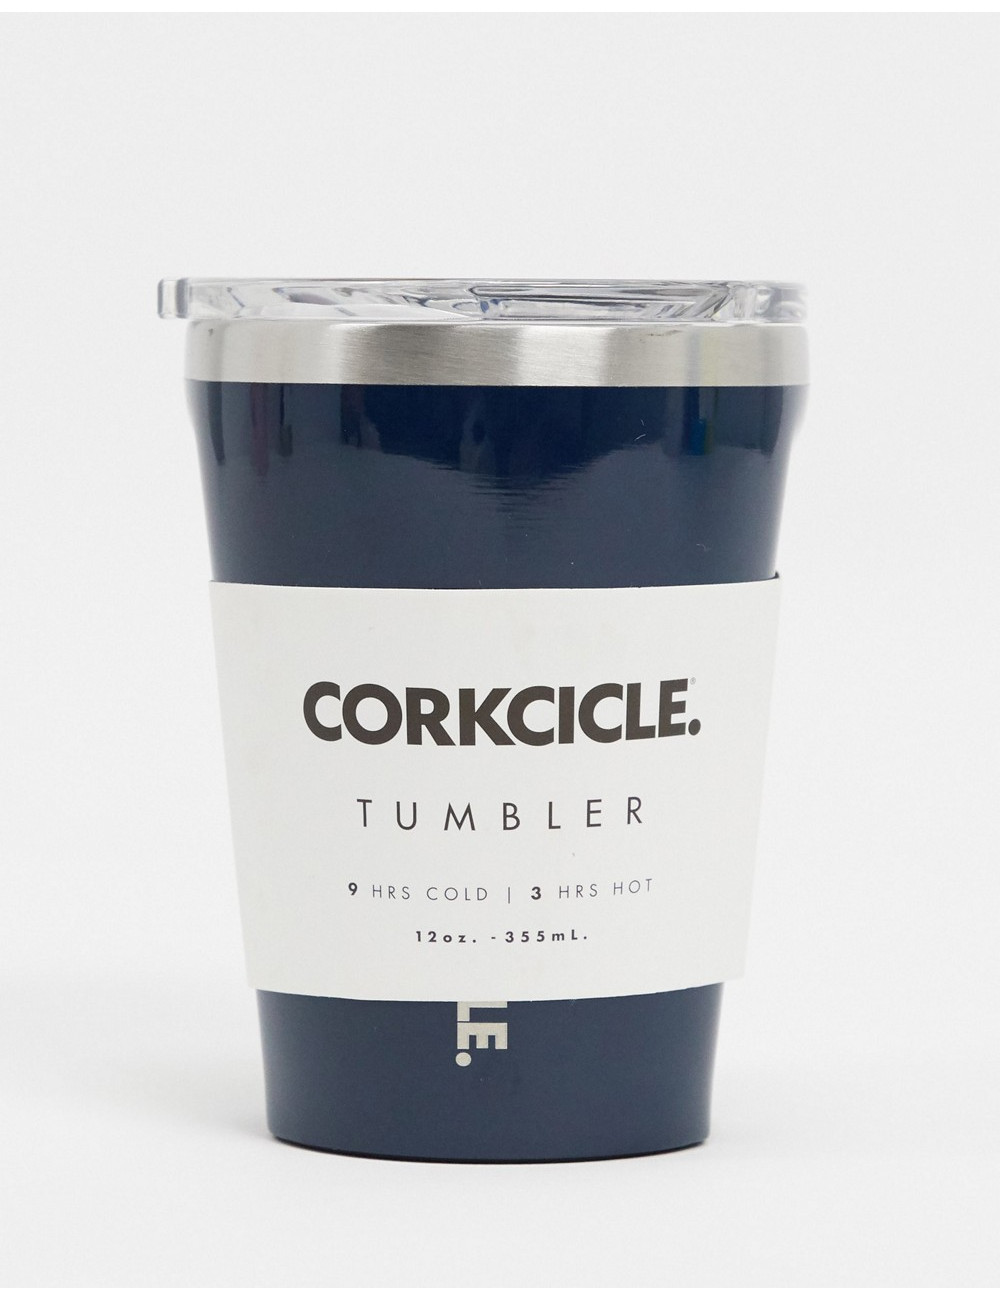 Corkcicle classic gloss...